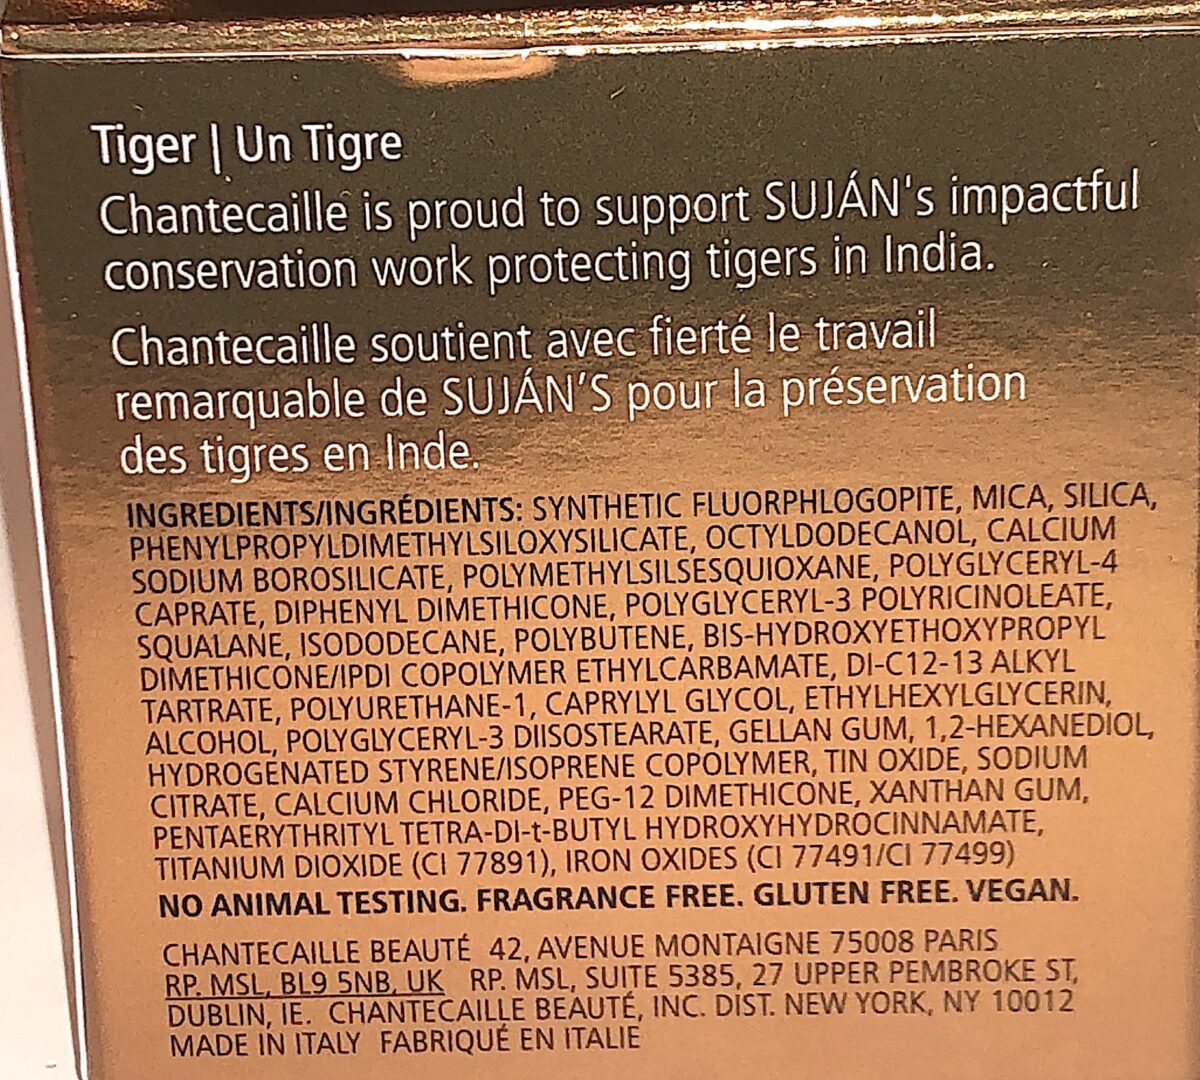 CHANTECAILLE INDIA'S VANISHING SPECIES EYE SHADES TIGER INGREDIENTS